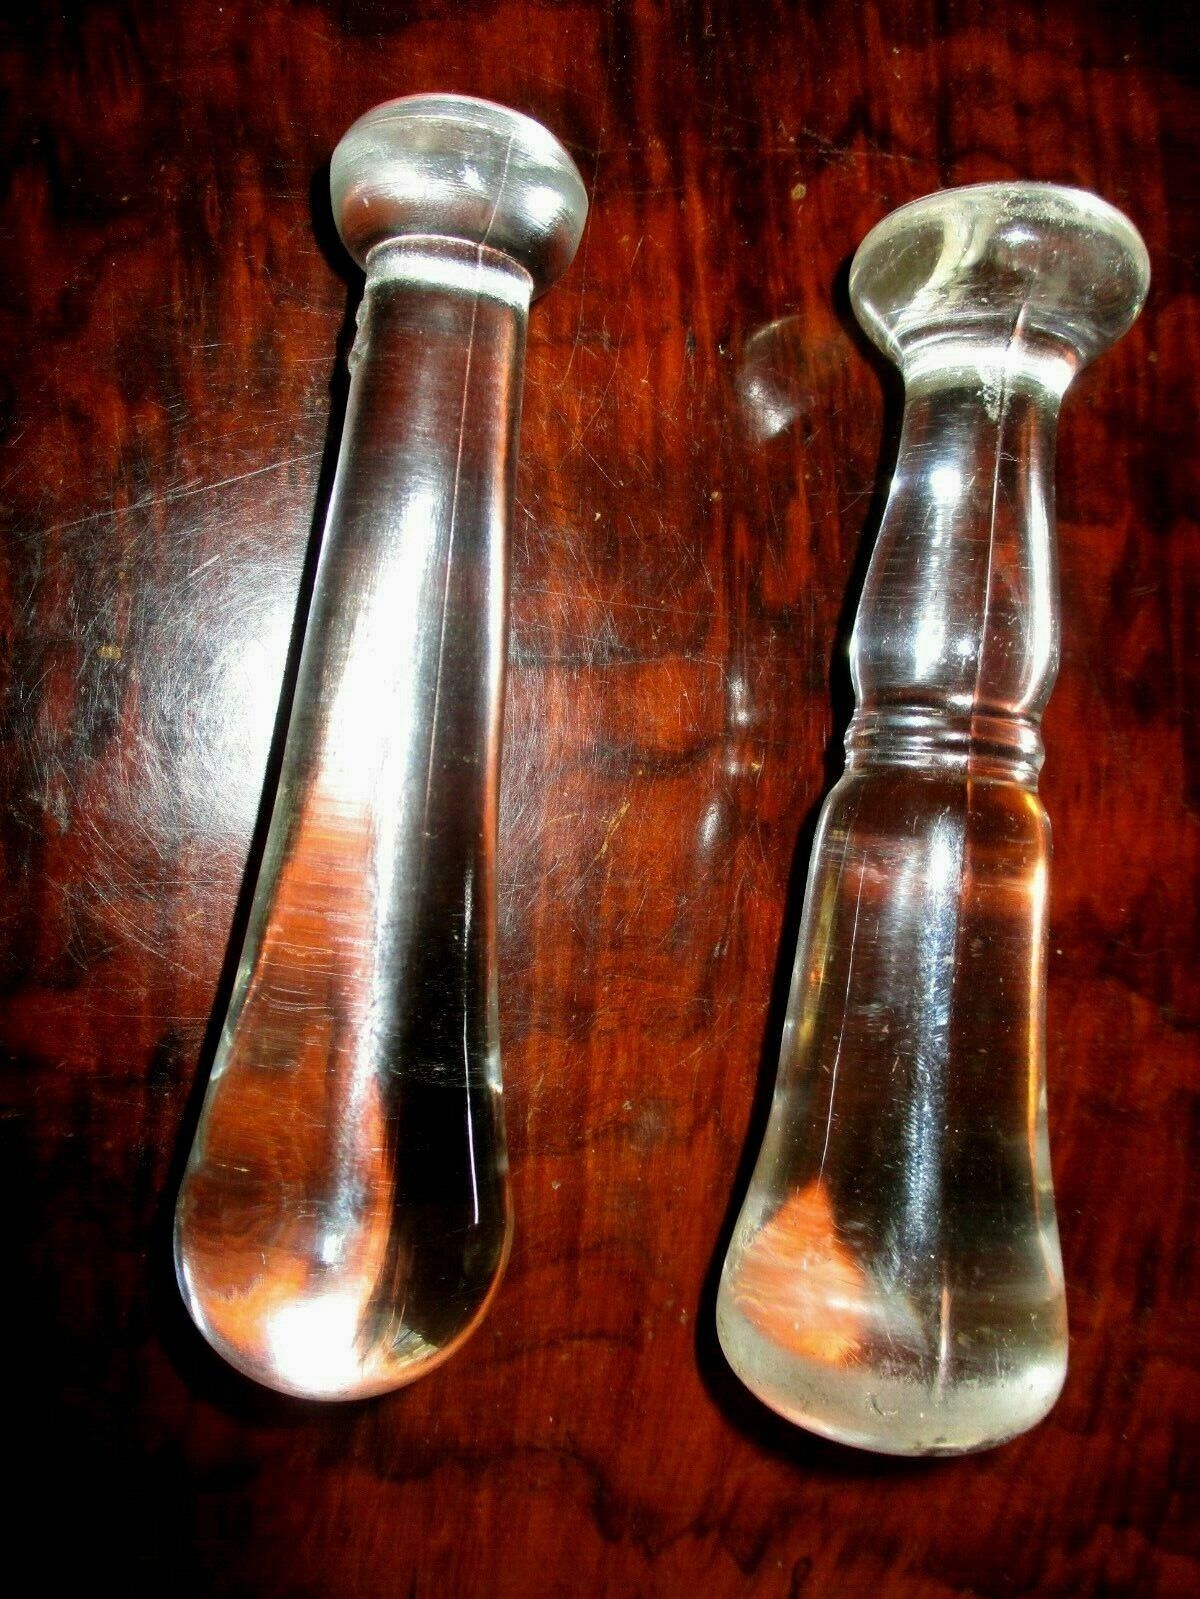 2 solid Glass Pharmacy Pestles/markd- #2 4" t x 1 1/2" w & 4 1/4" x 1 1/2" wide Без бренда